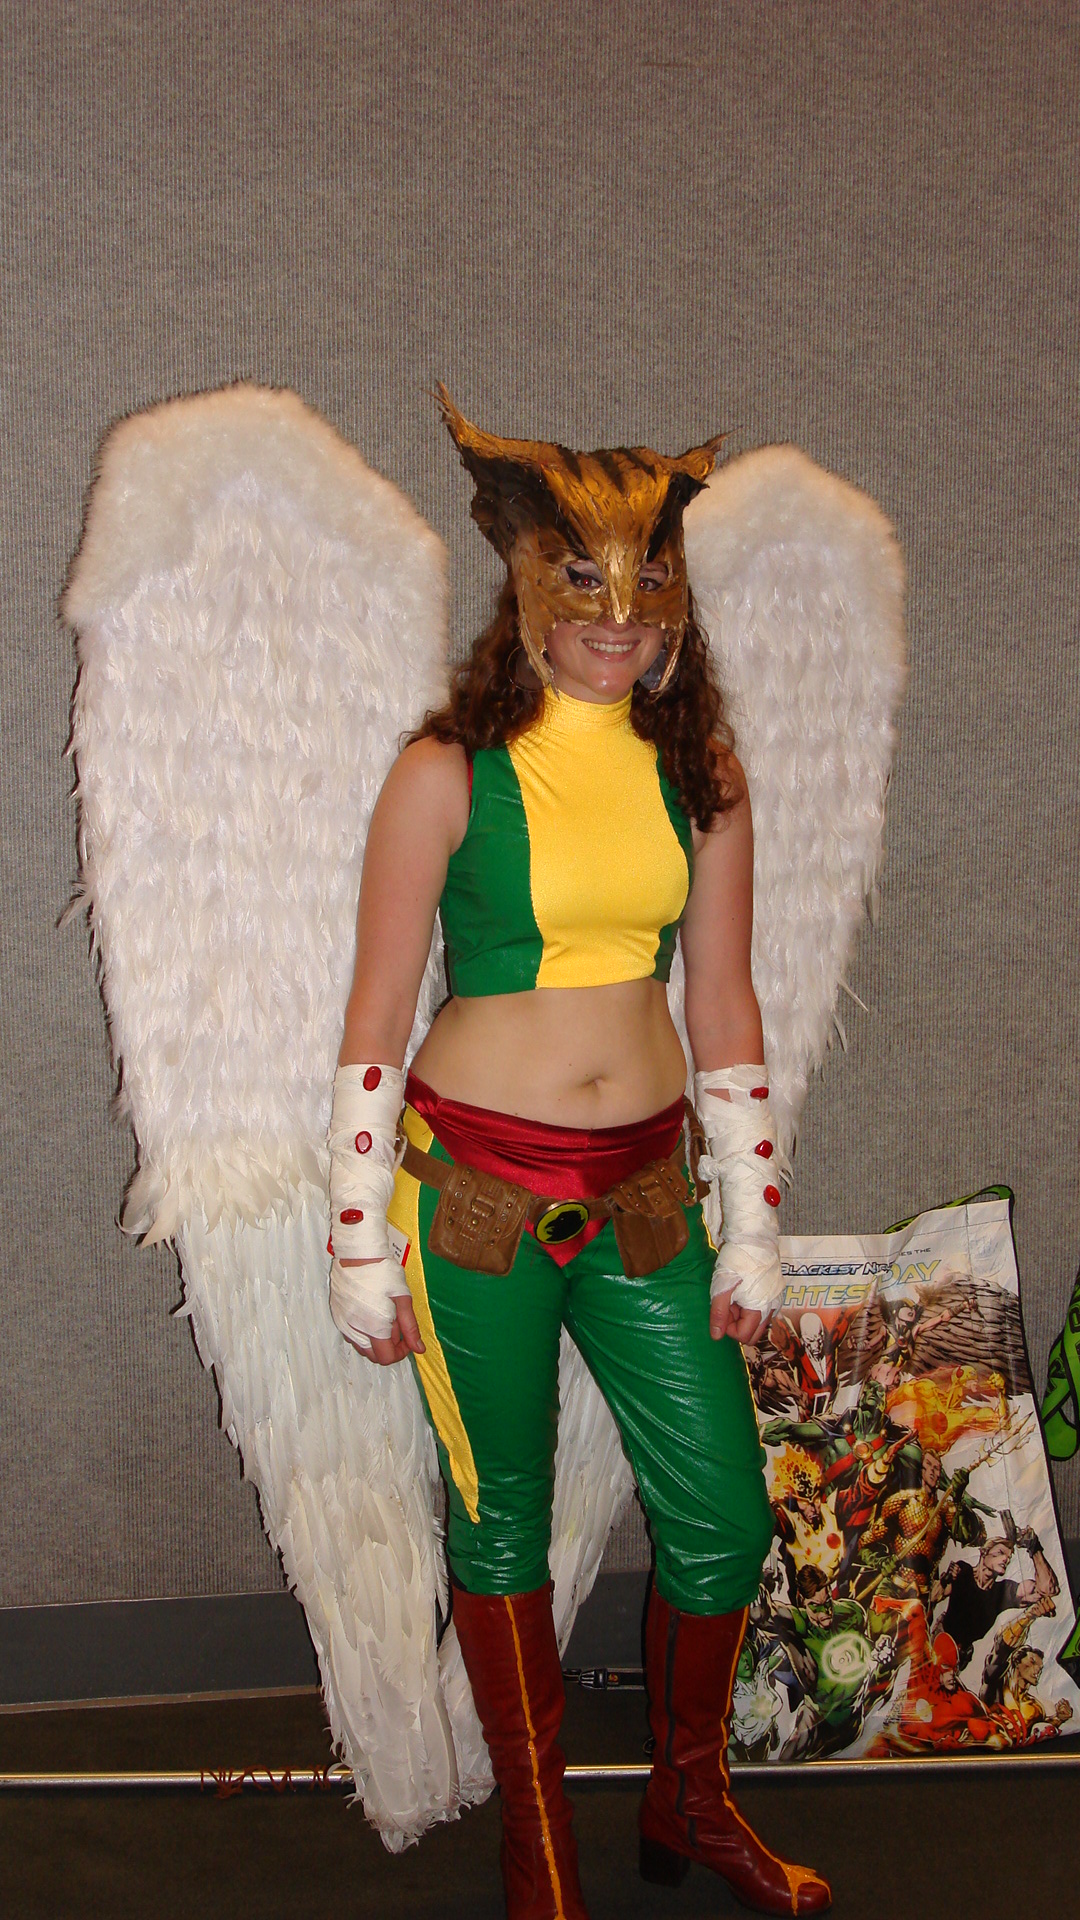 https://www.entertainmentfuse.com/images/PAC - Comic Con - Hawkgirl.JPG